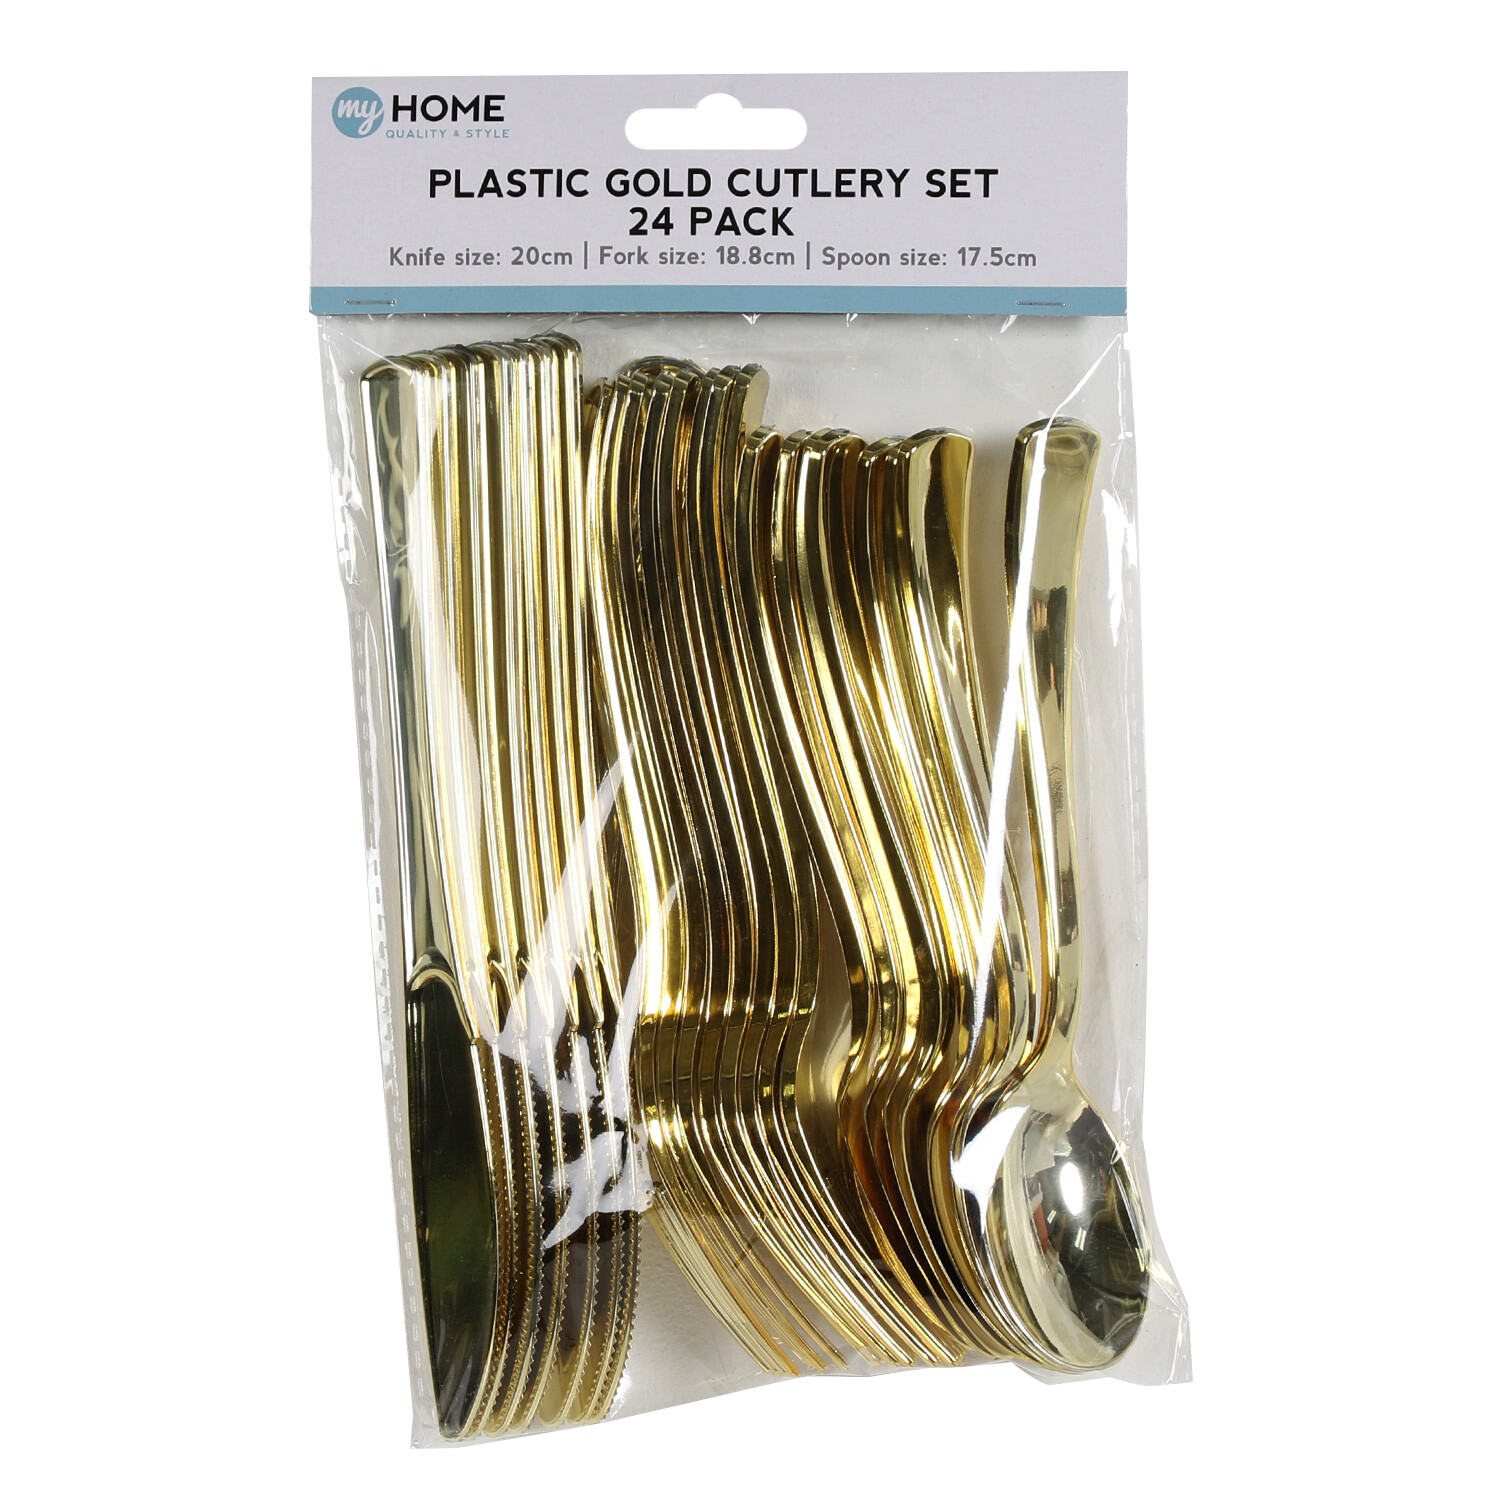 Pack of 24 Gold Plastic Cutlery Set - Gold Image 1